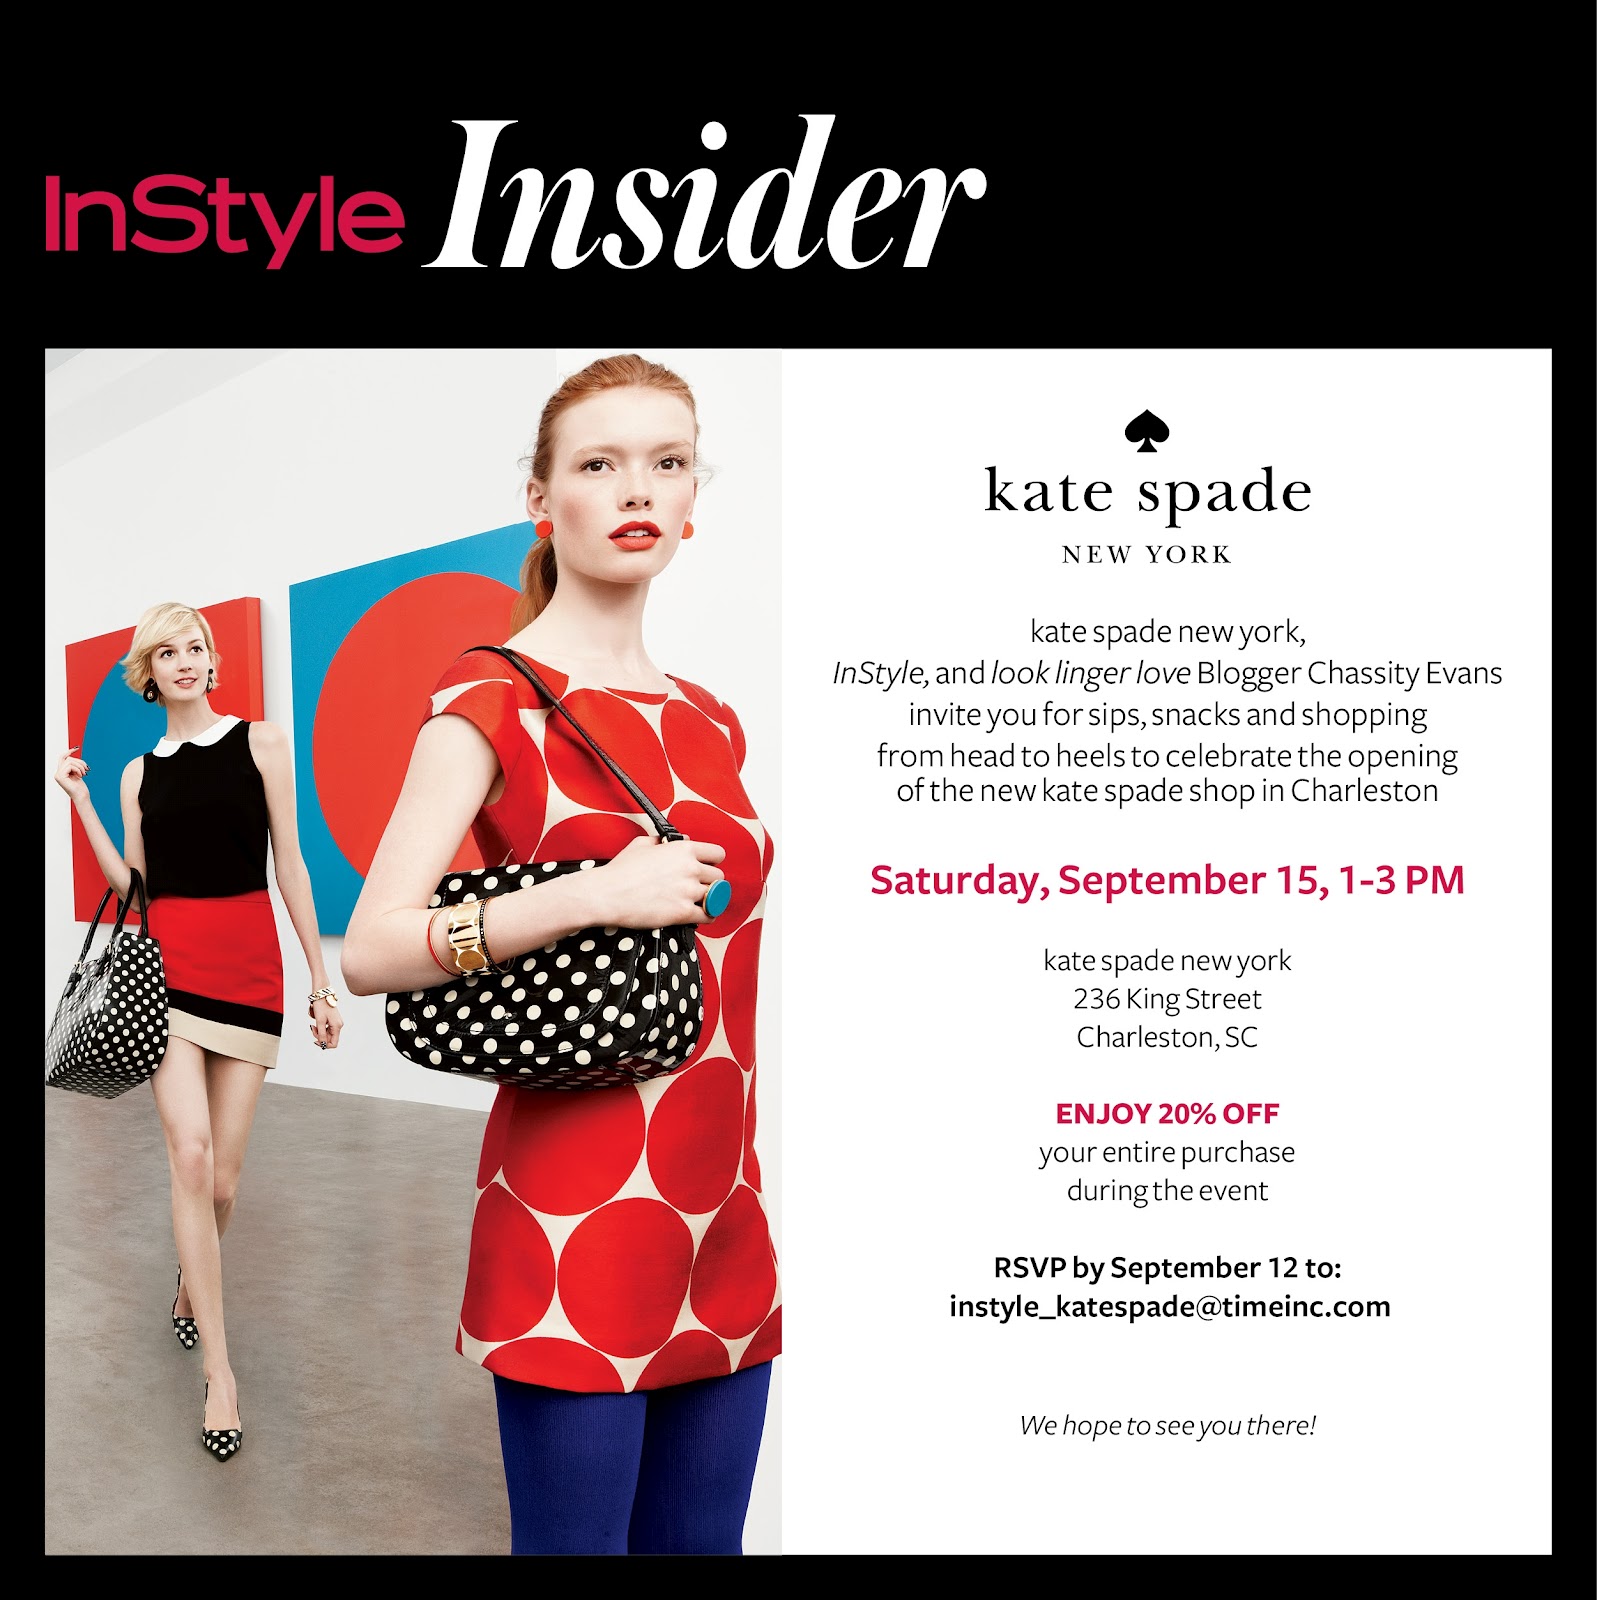 kate spade new york's charleston opening party - Look Linger Love